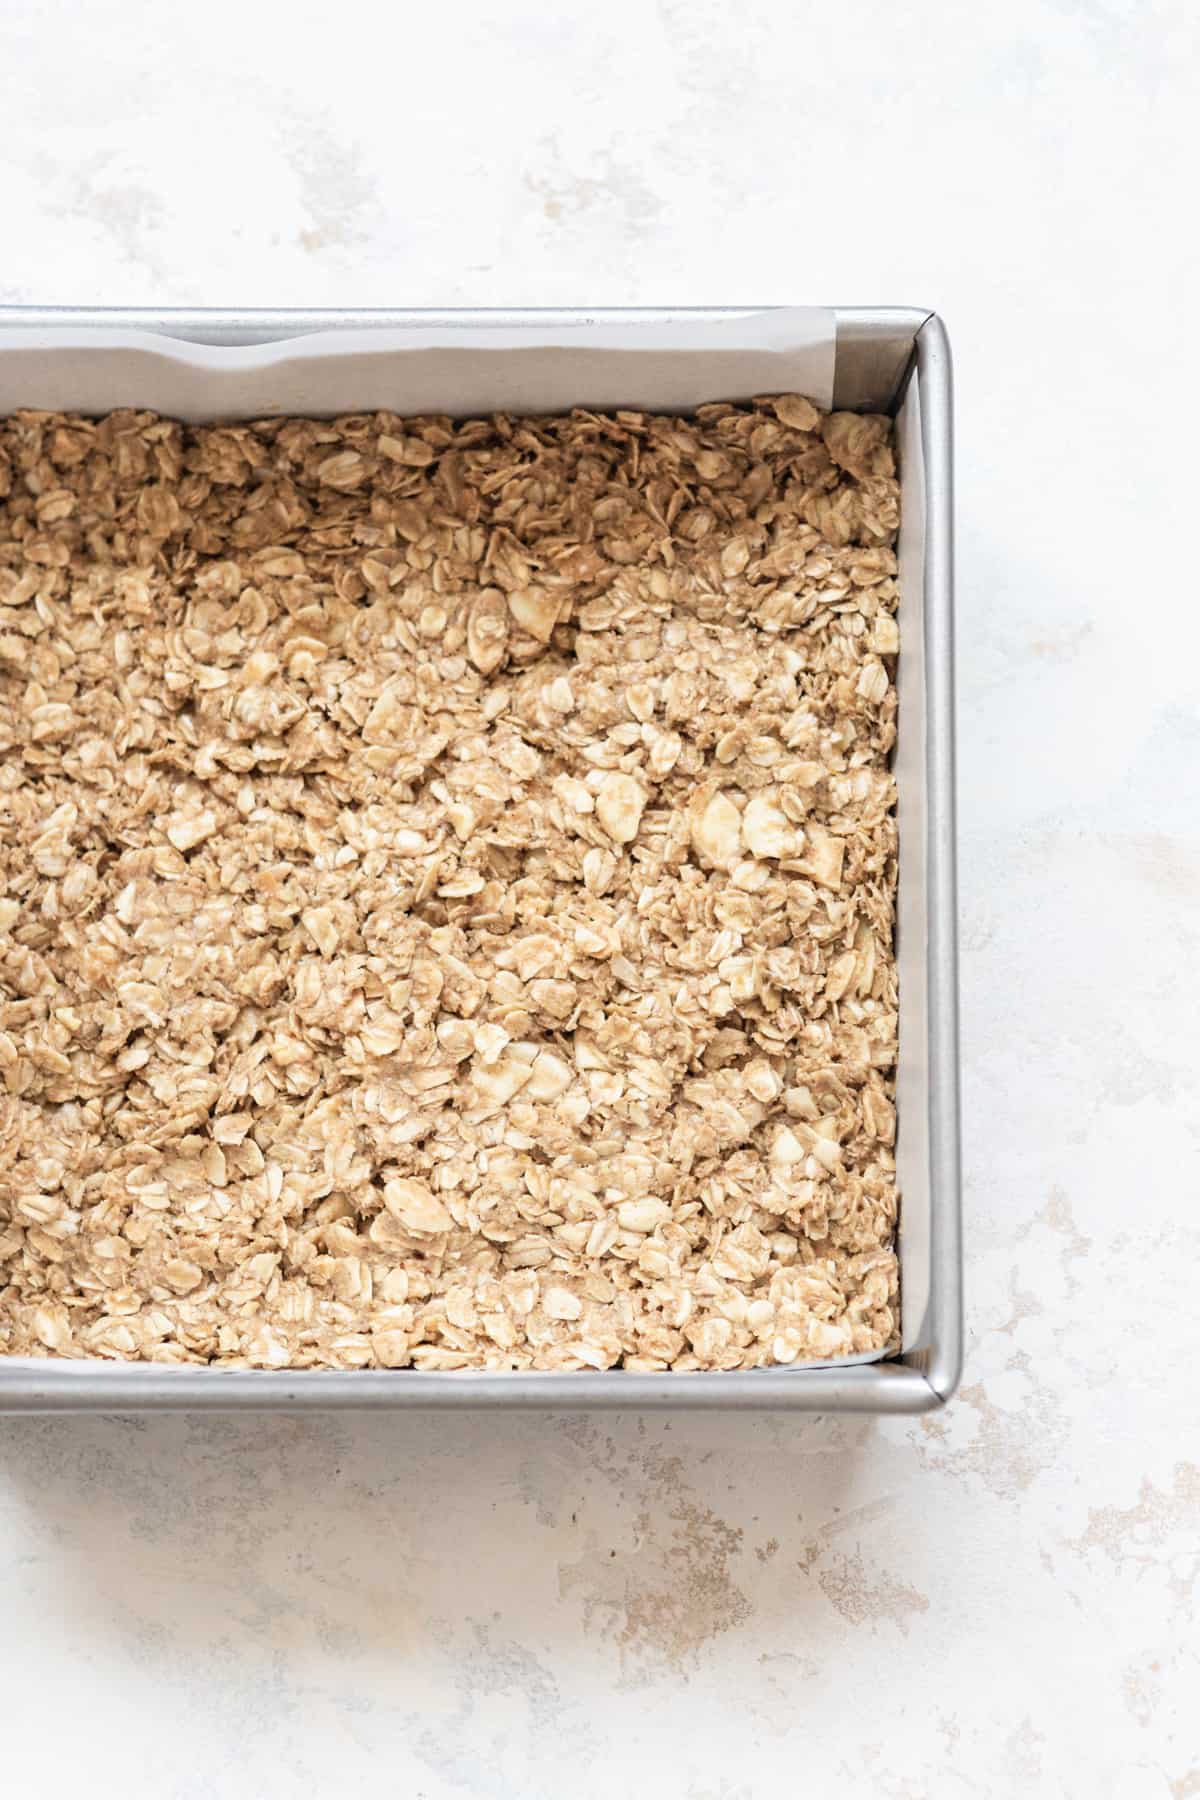 Granola base pressed down in a lined square baking pan.